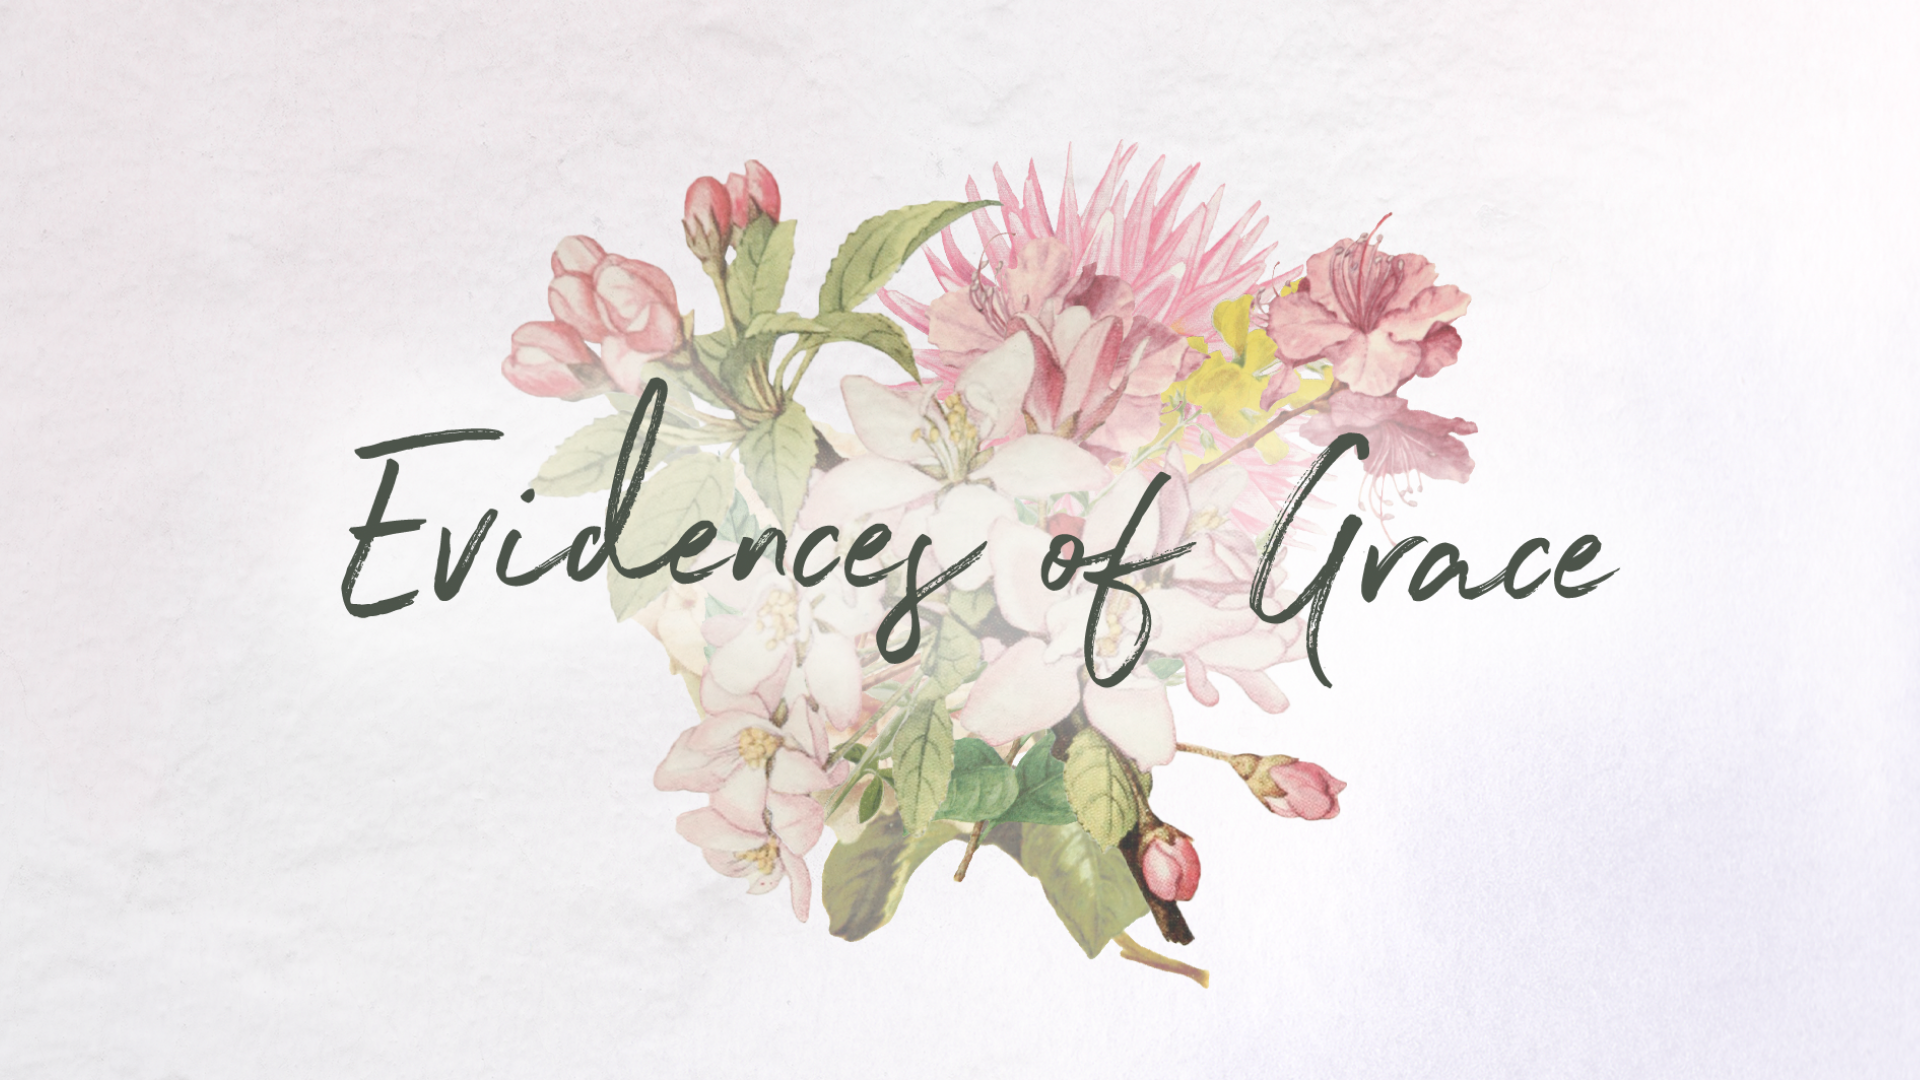 Evidences of Grace banner